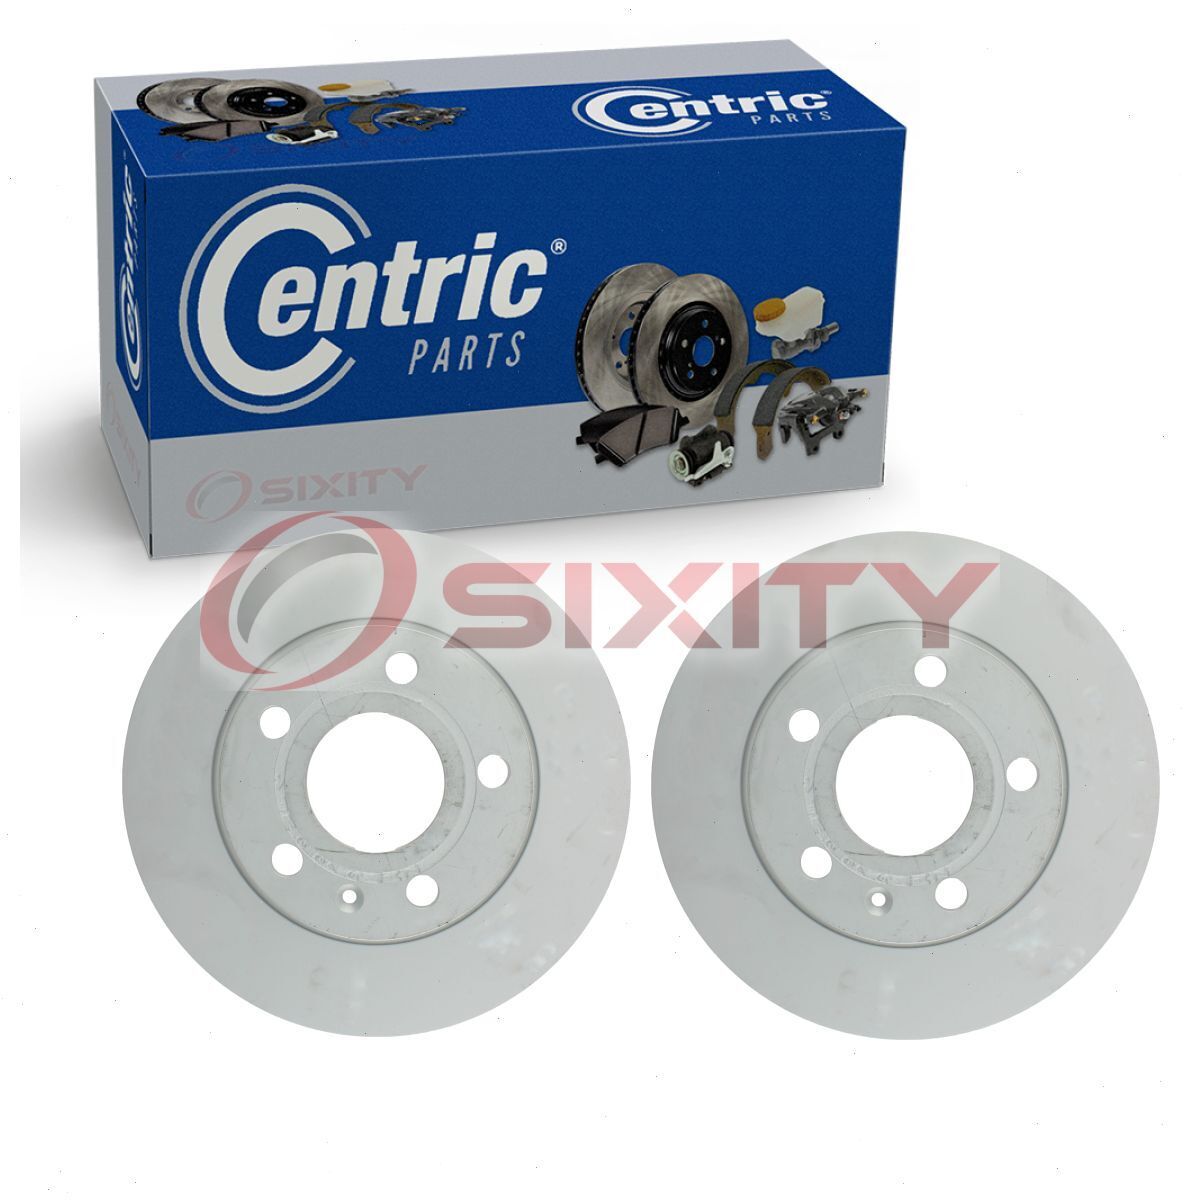 2 pc Centric Rear Disc Brake Rotors for 2016 Seat Leon Braking Tire Stopping ox